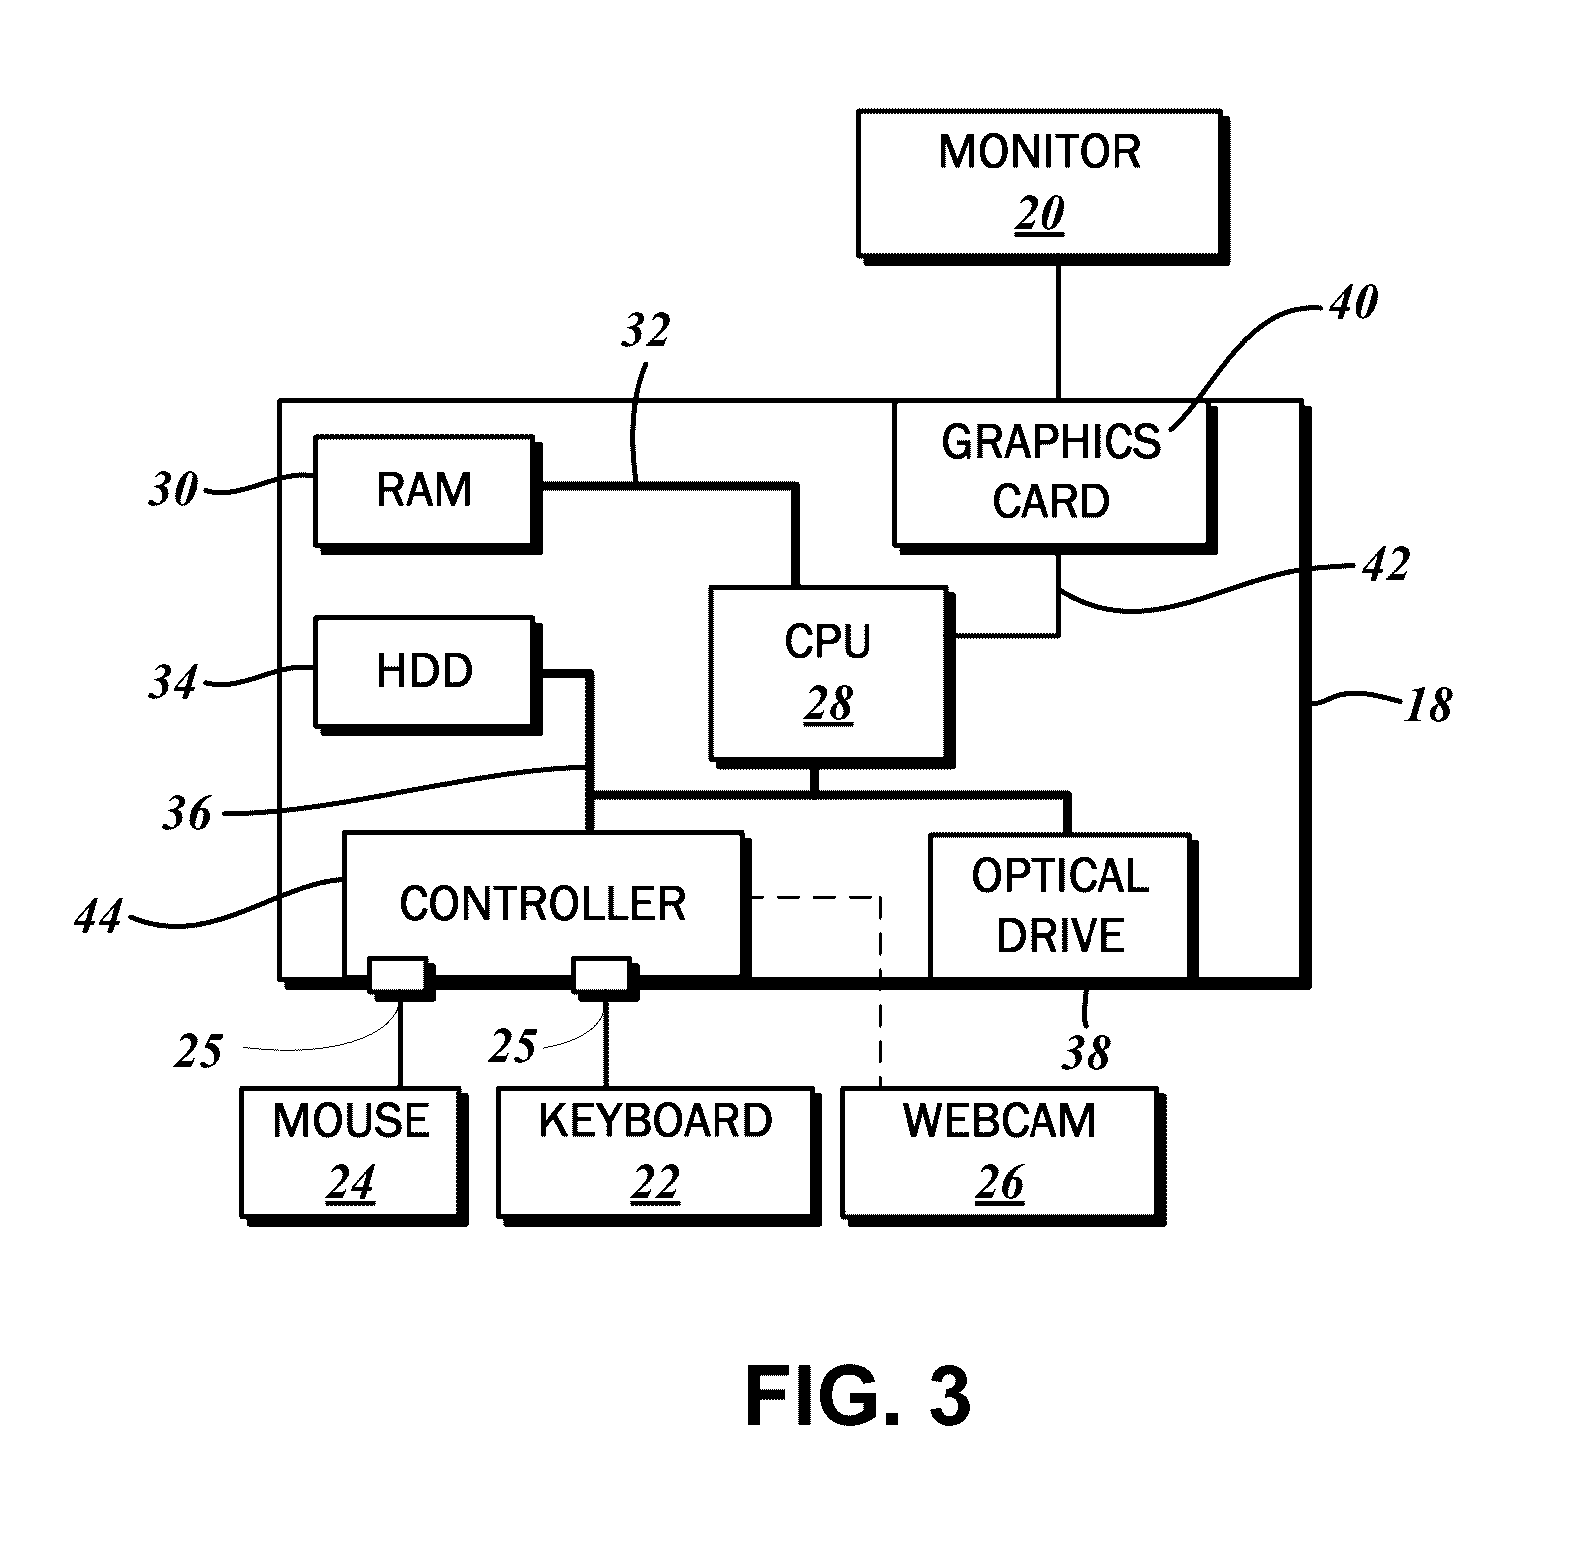 Method for archiving a collaboration session with a multimedia data stream and view parameters